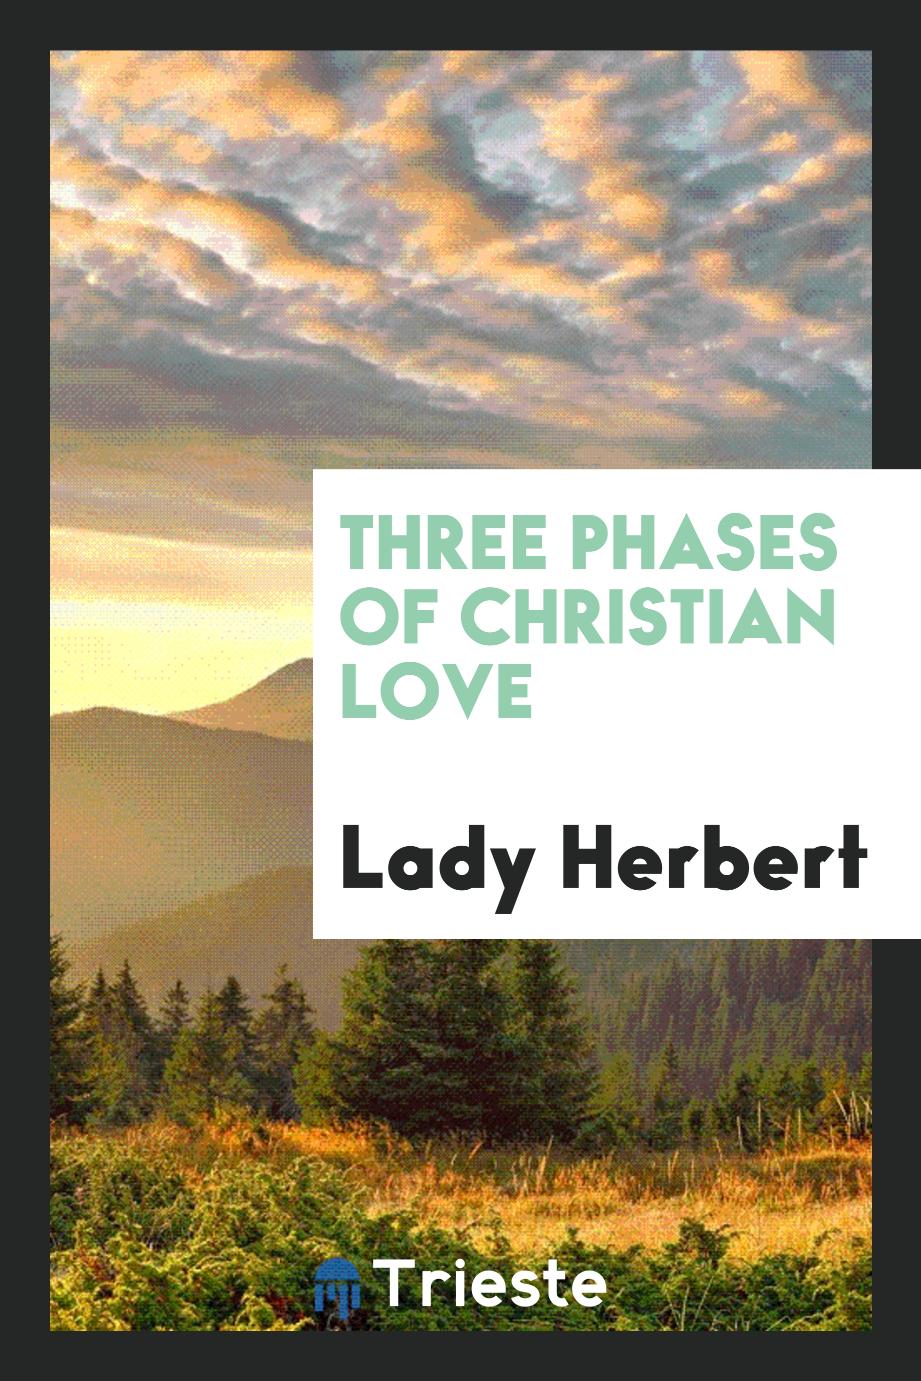 Three phases of Christian love